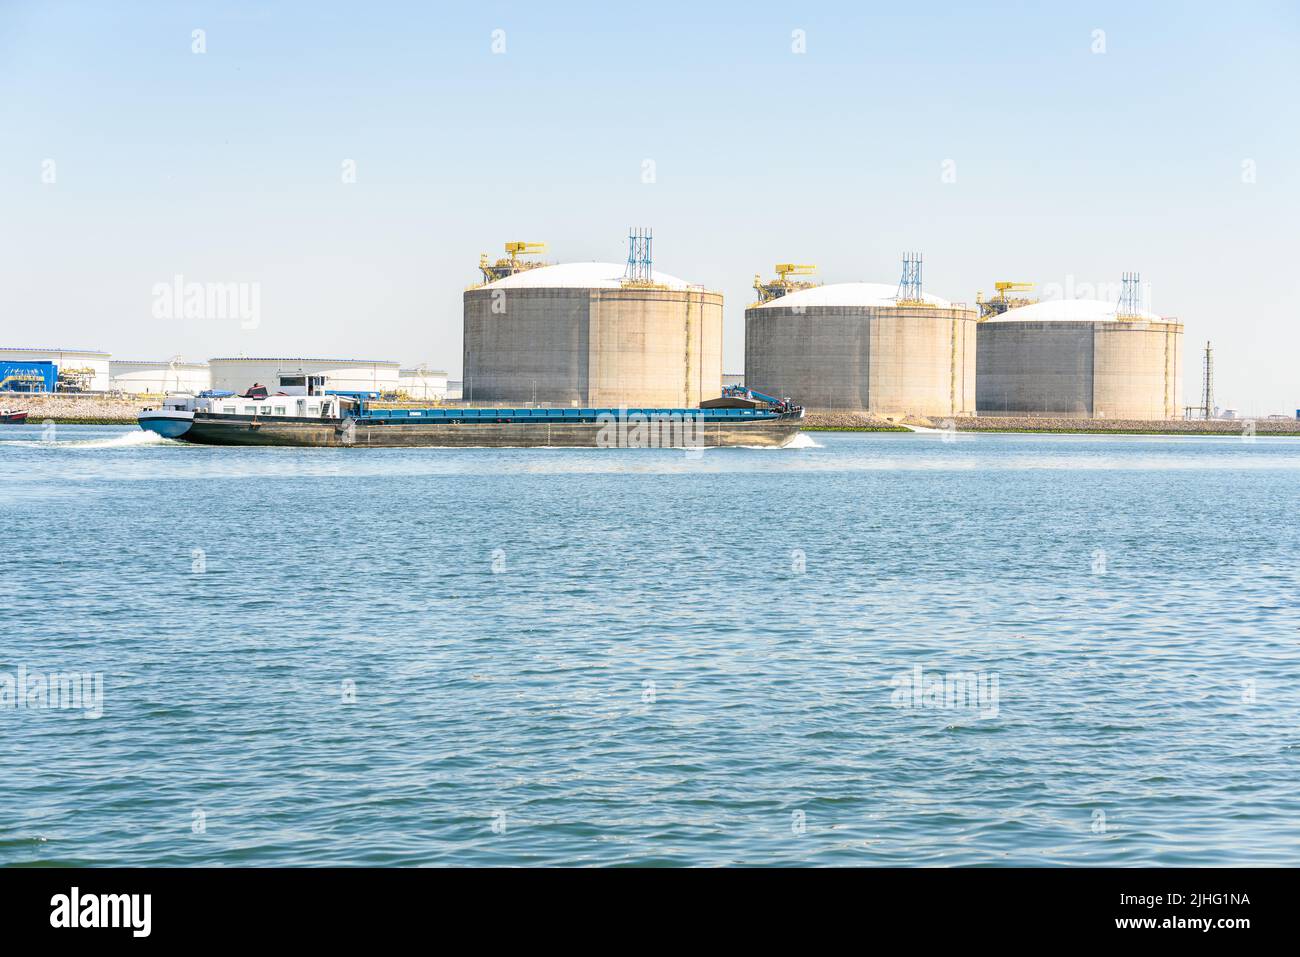 Bulk carrier barge in harbour with large concrete LNG taks in background. Port of Rotterdam, The Netherlands. Stock Photo